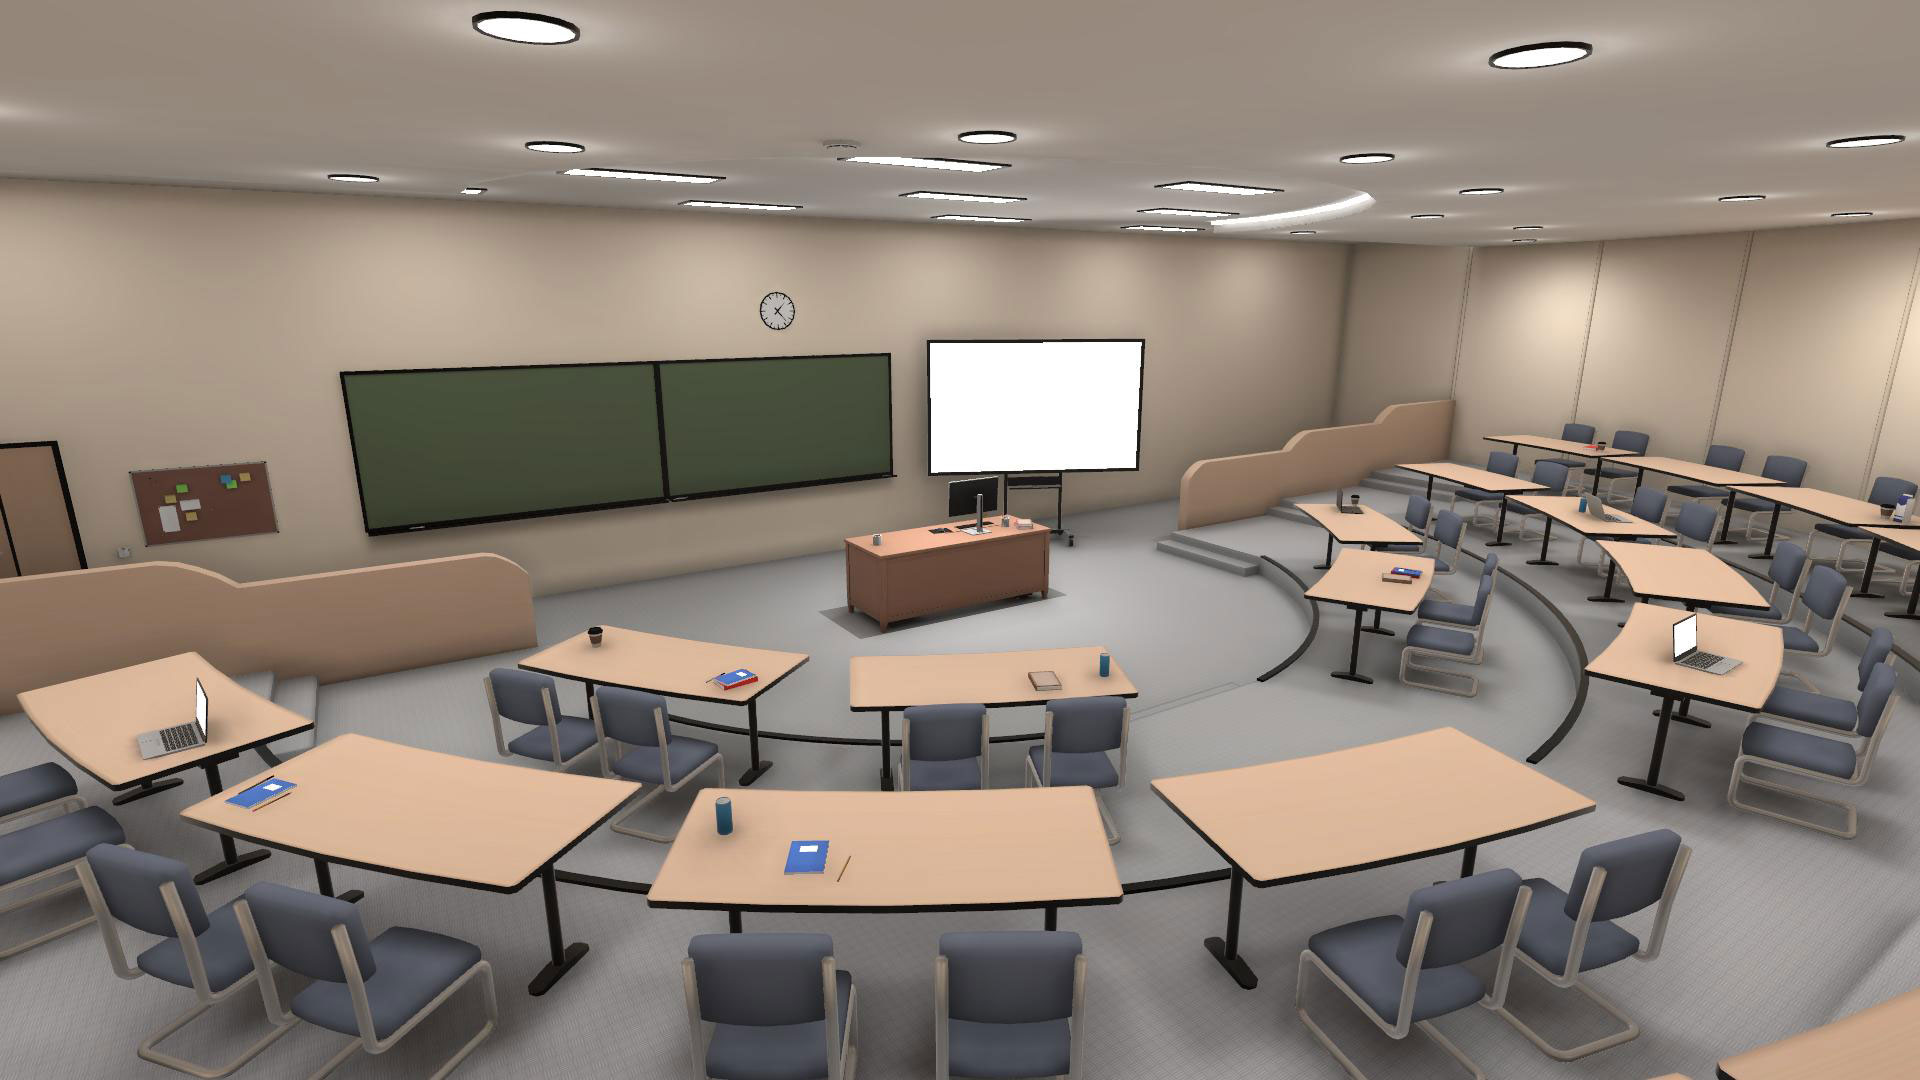 A 3D model of a classroom, made for VR.